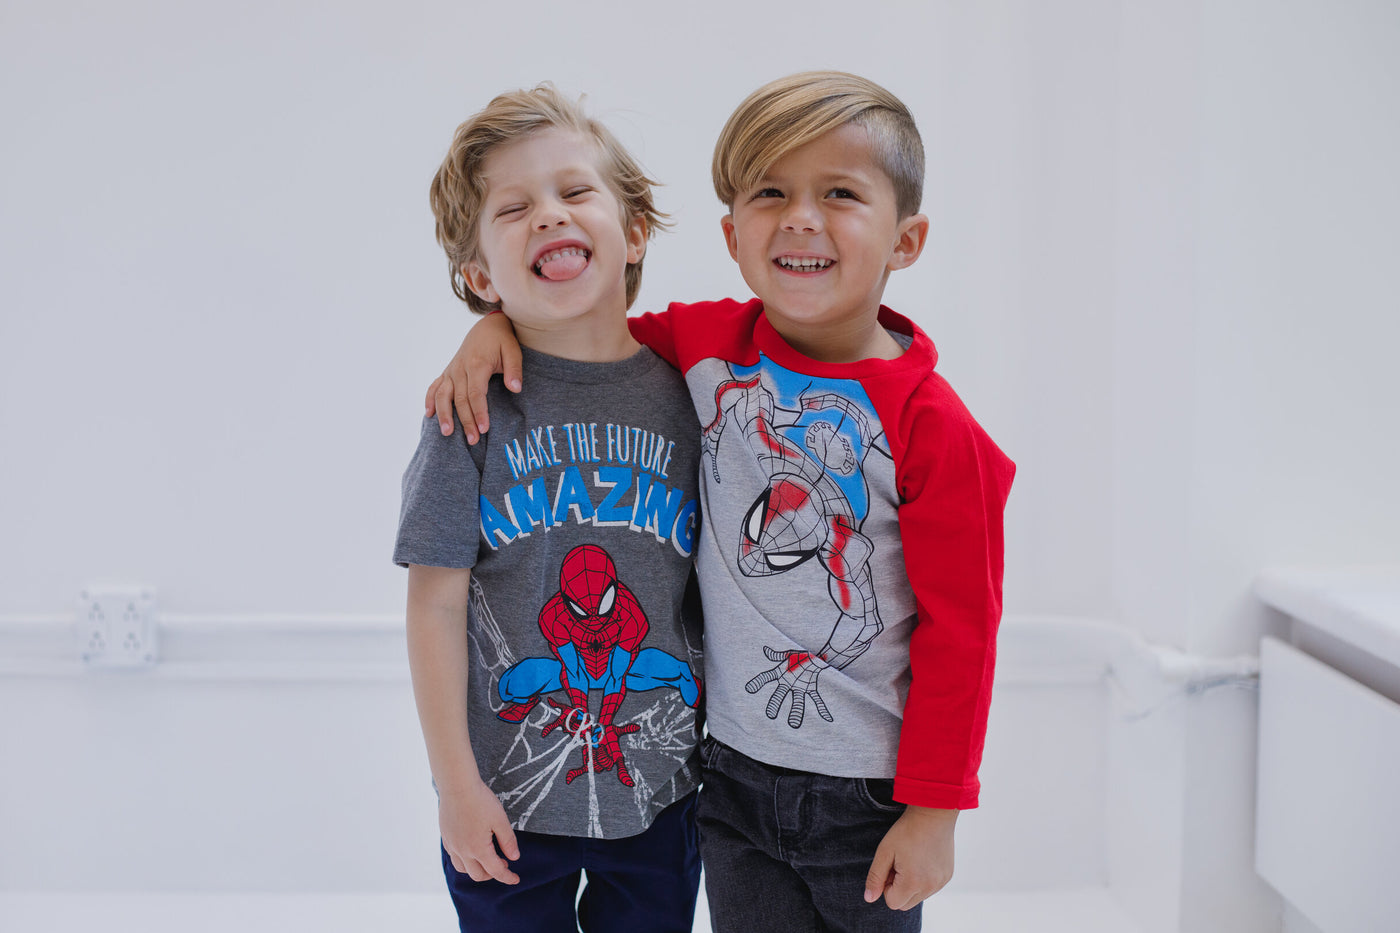 Marvel Spider-Man 2 Pack Long Sleeve T-Shirts